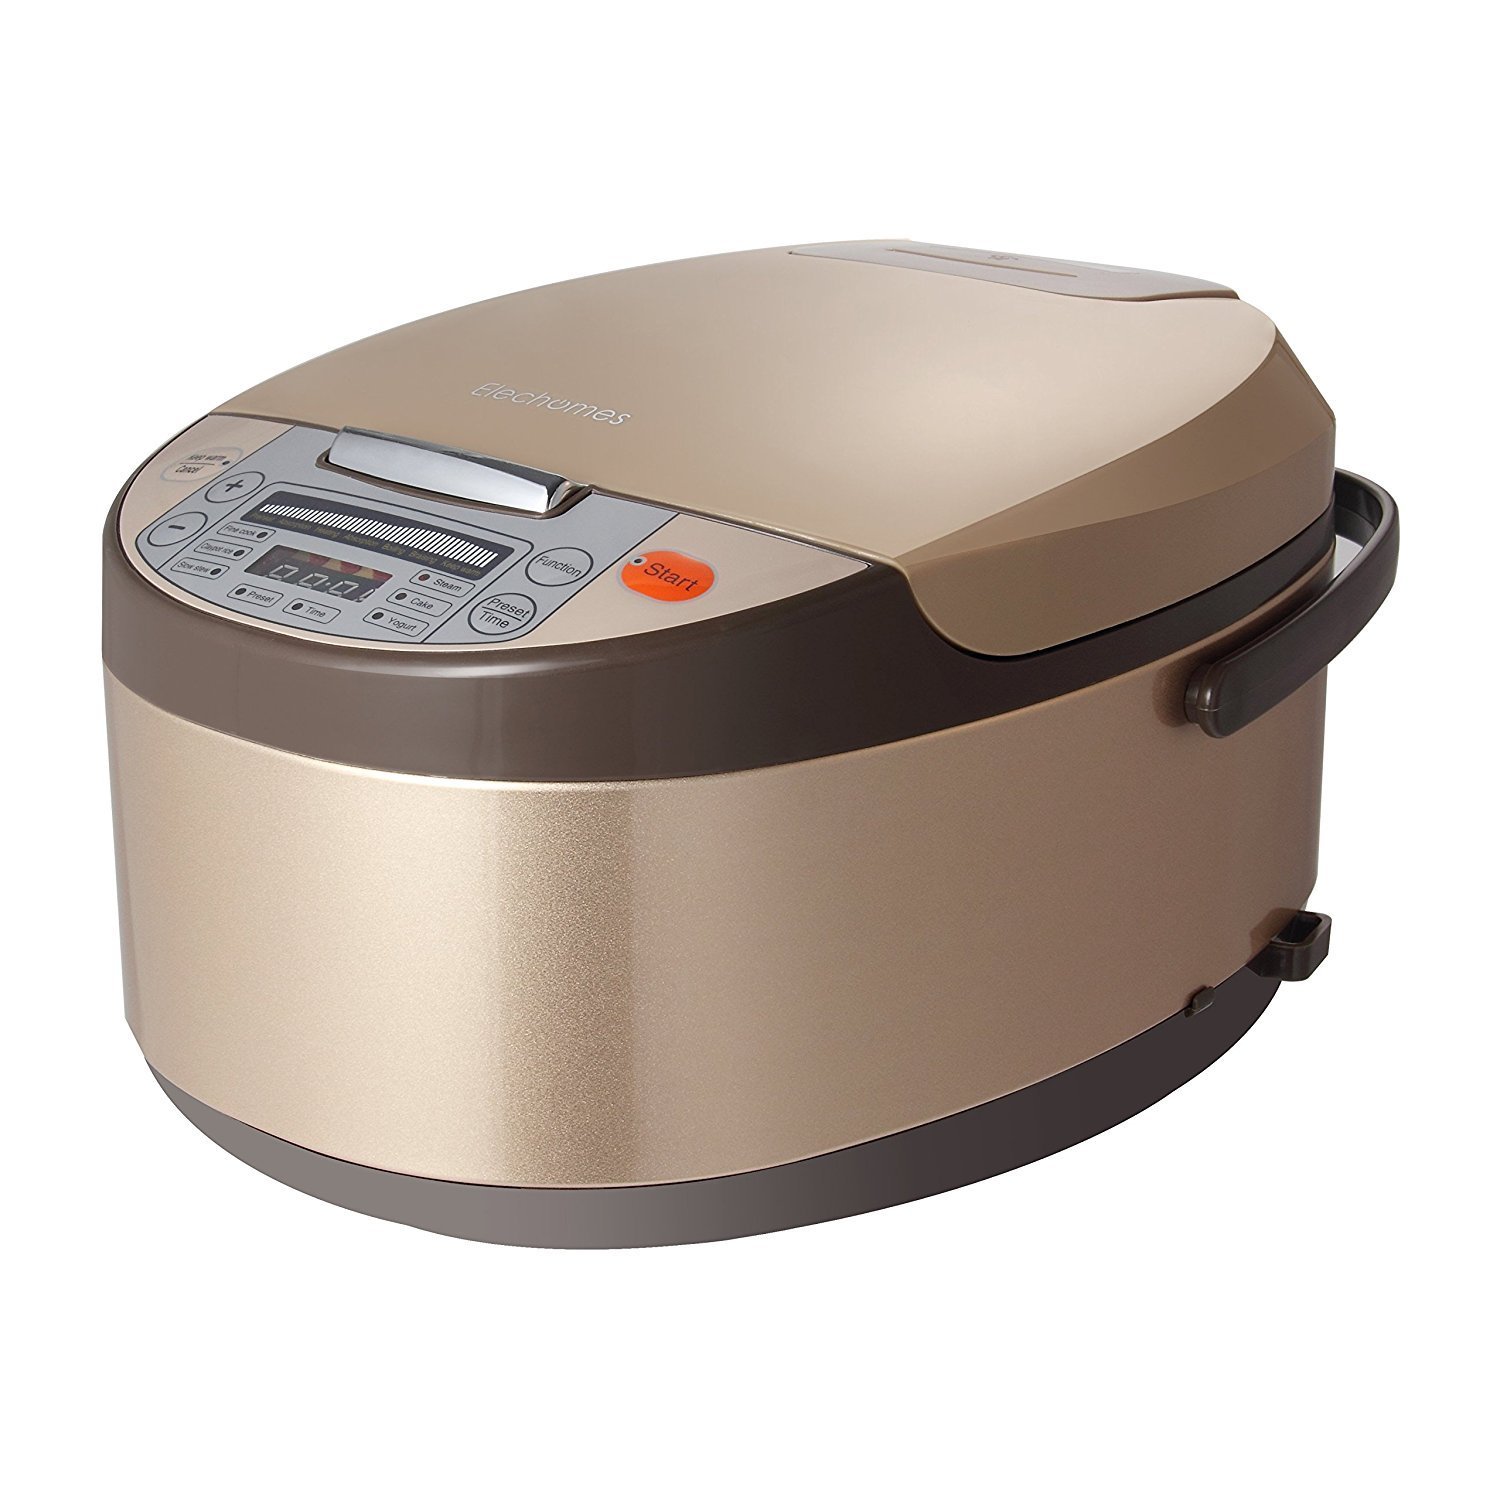 Price drop! Elechomes 6-in-1 multi-use digital cooker for $37